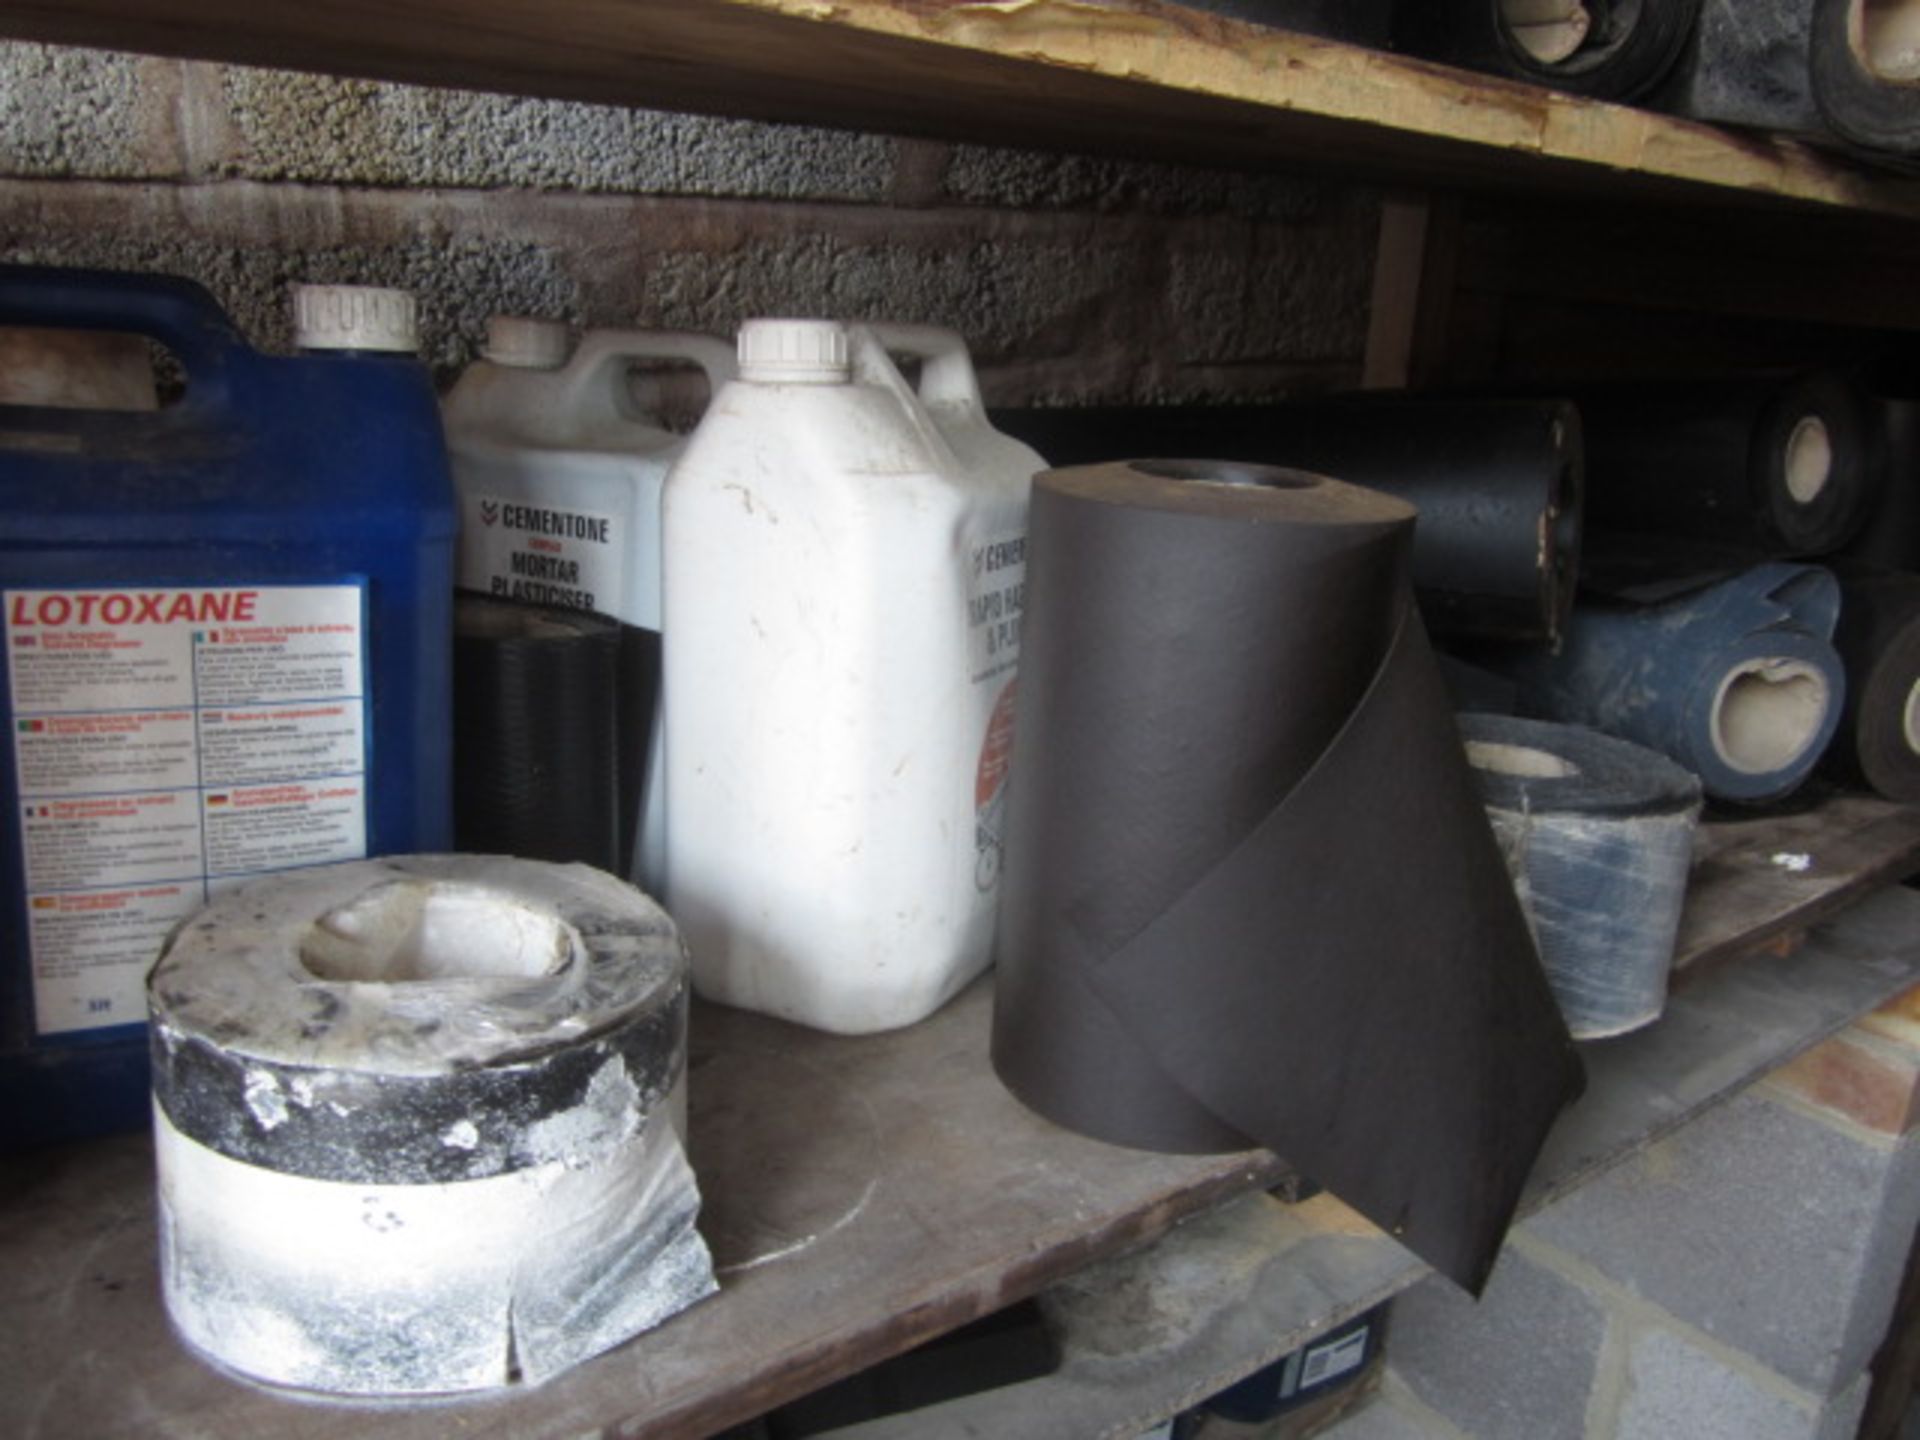 Contents of rack including assorted reels of damp proof course, sub floor Compound, adhesive seal, - Image 3 of 11